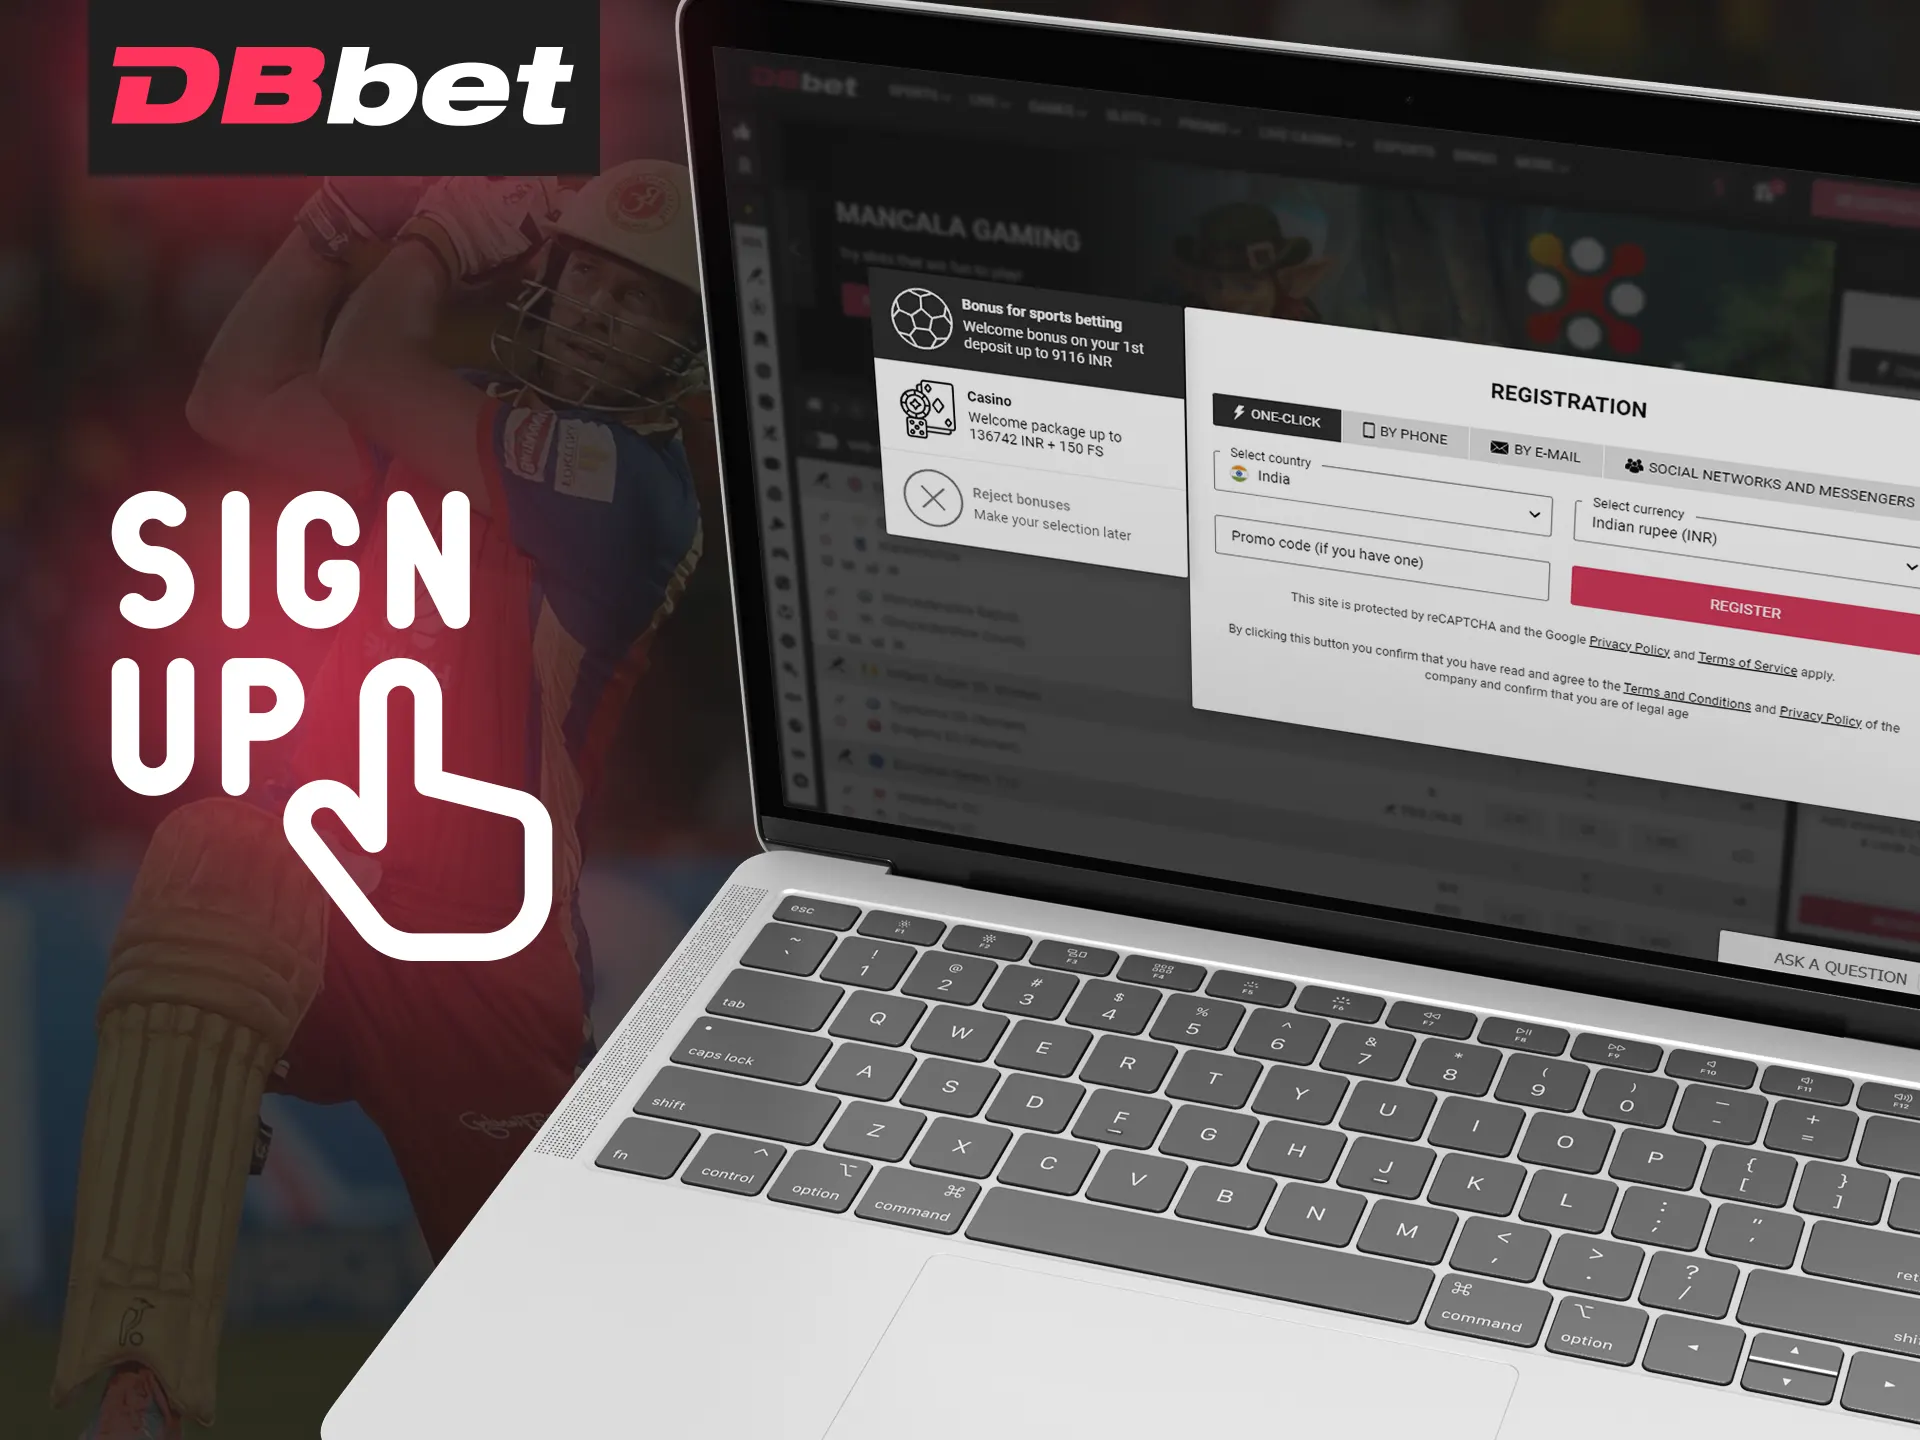 Complete a simple registration process at DBBet.